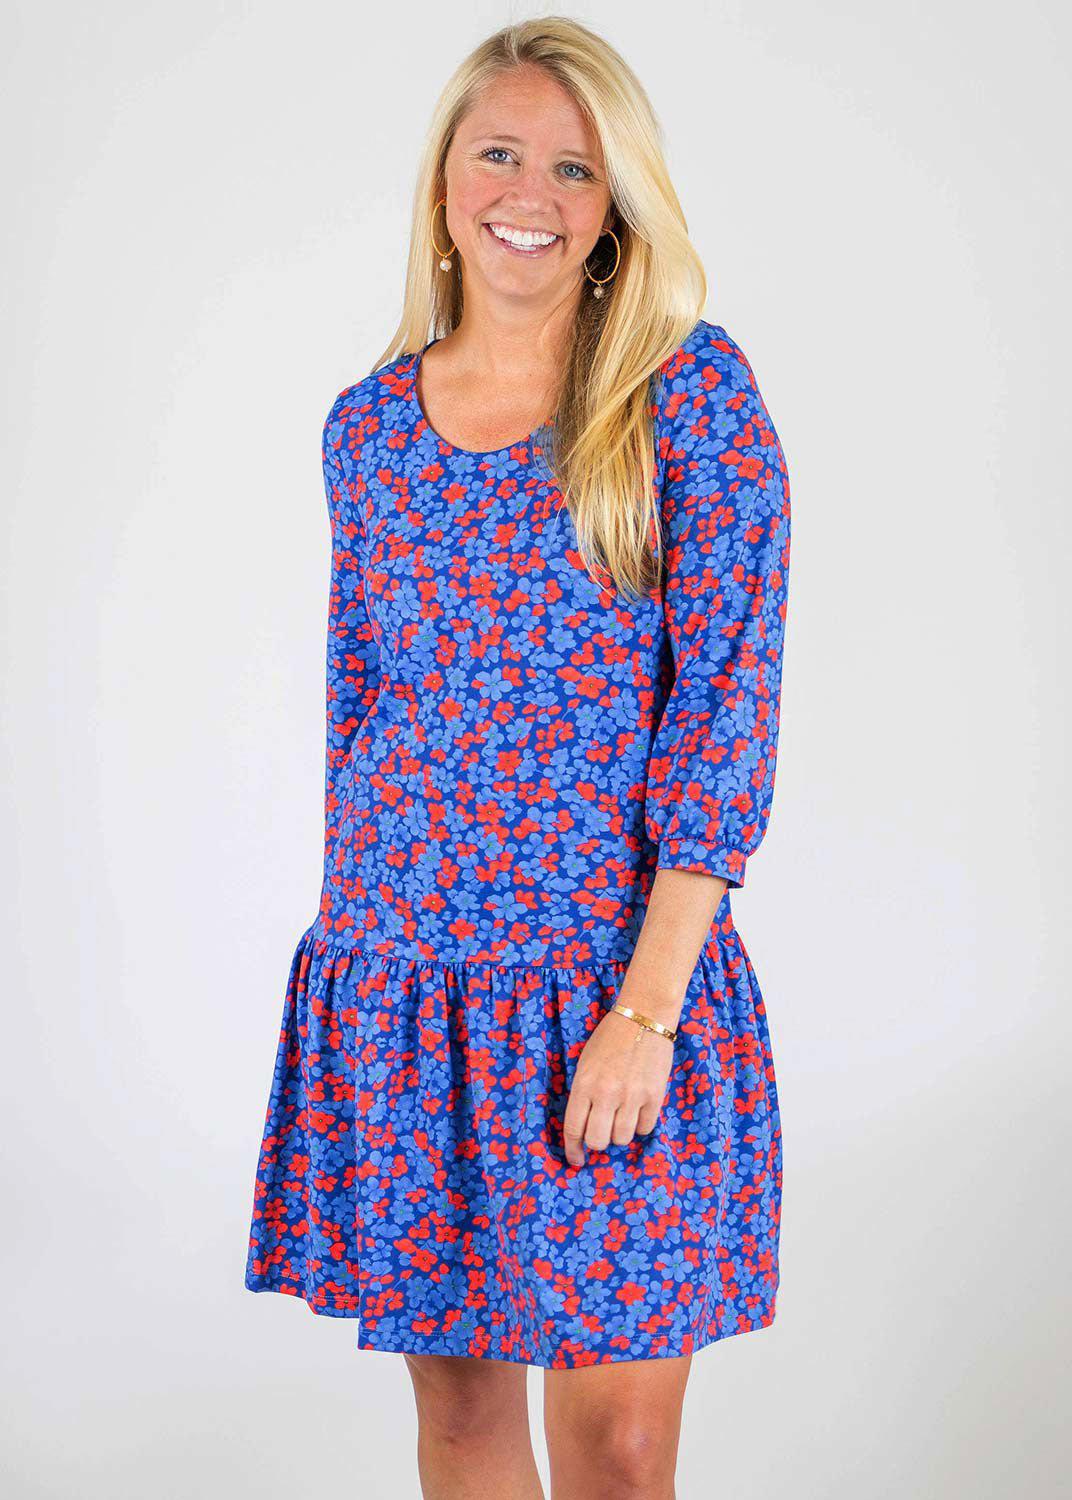 4 Sleeve Dress in a Floral Print